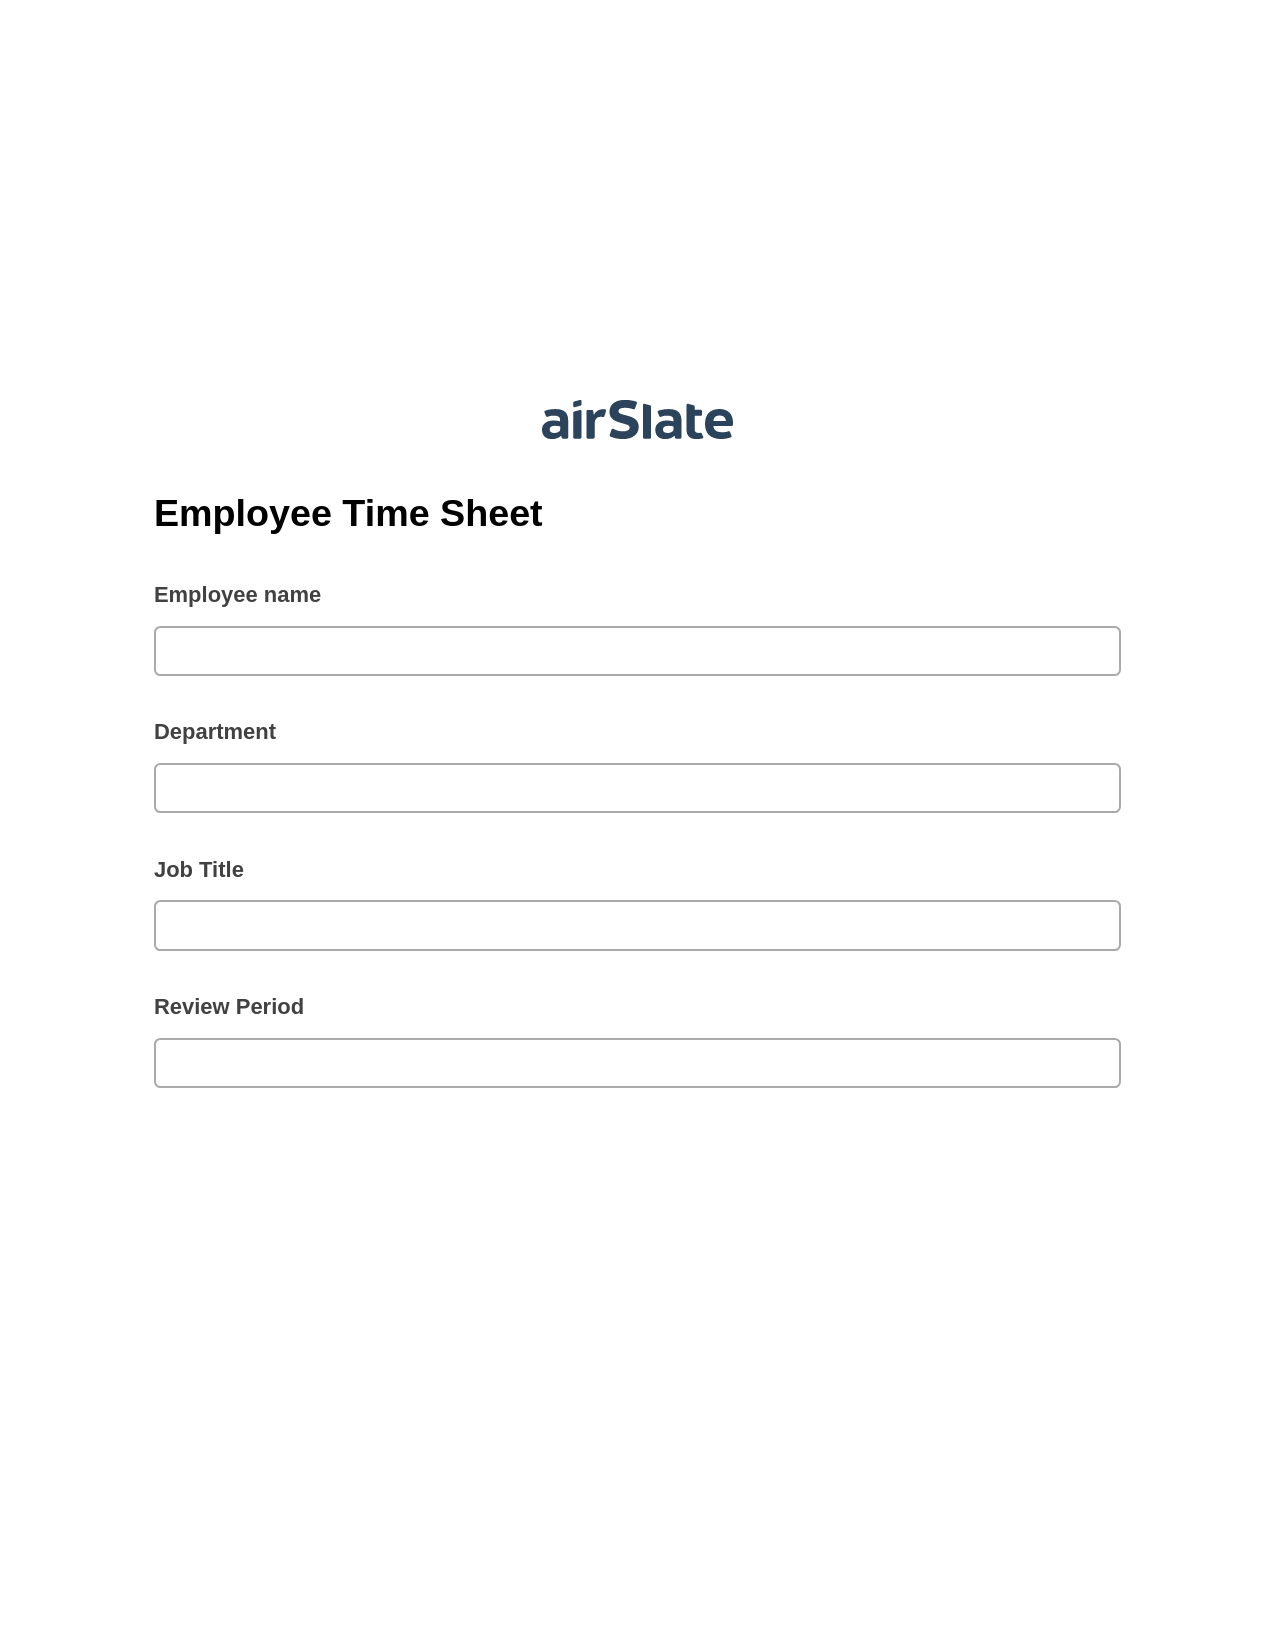 Employee Time Sheet Pre-fill from MS Dynamics 365 Records, Create Salesforce Records Bot, Archive to Google Drive Bot